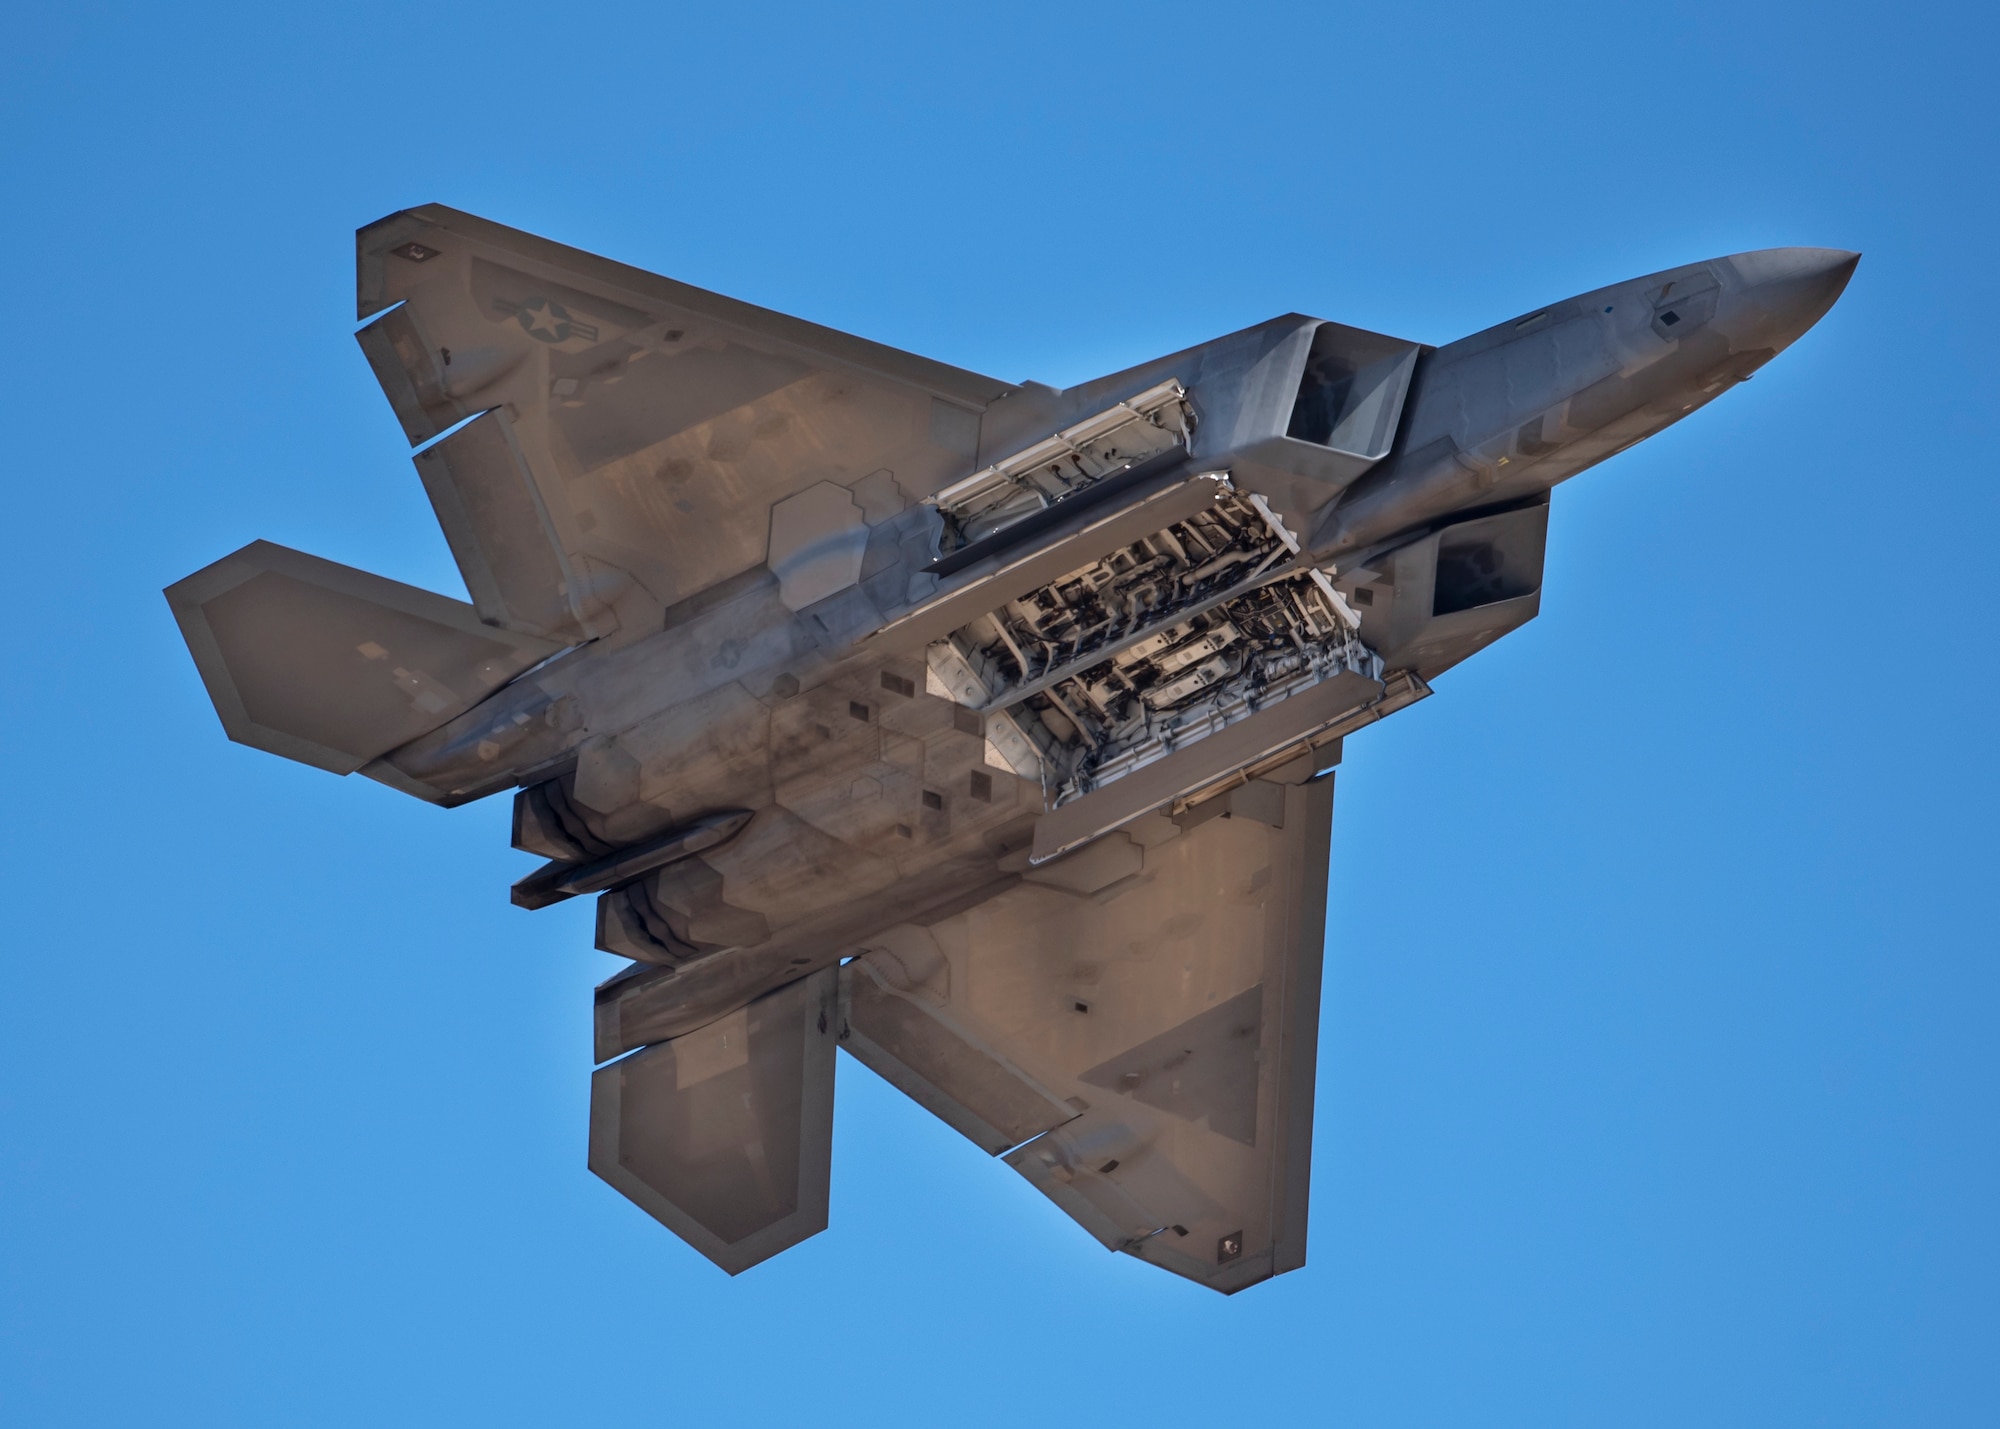 Maj. Paul Lopez II flies an F-22 Raptor during the Sheppard Air Force Base Guardians of Freedom Open House and Air Show at Sheppard AFB, Texas, Oct. 26, 2019. Lopez is the F-22 demonstration team commander. The F-22 Raptor demonstration team performs precision aerial maneuvers at air shows across the world to demonstrate the unique capabilities of the world's premier fifth generation fighter aircraft. (U.S. Air Force photo by Airman 1st Class Pedro Tenorio)